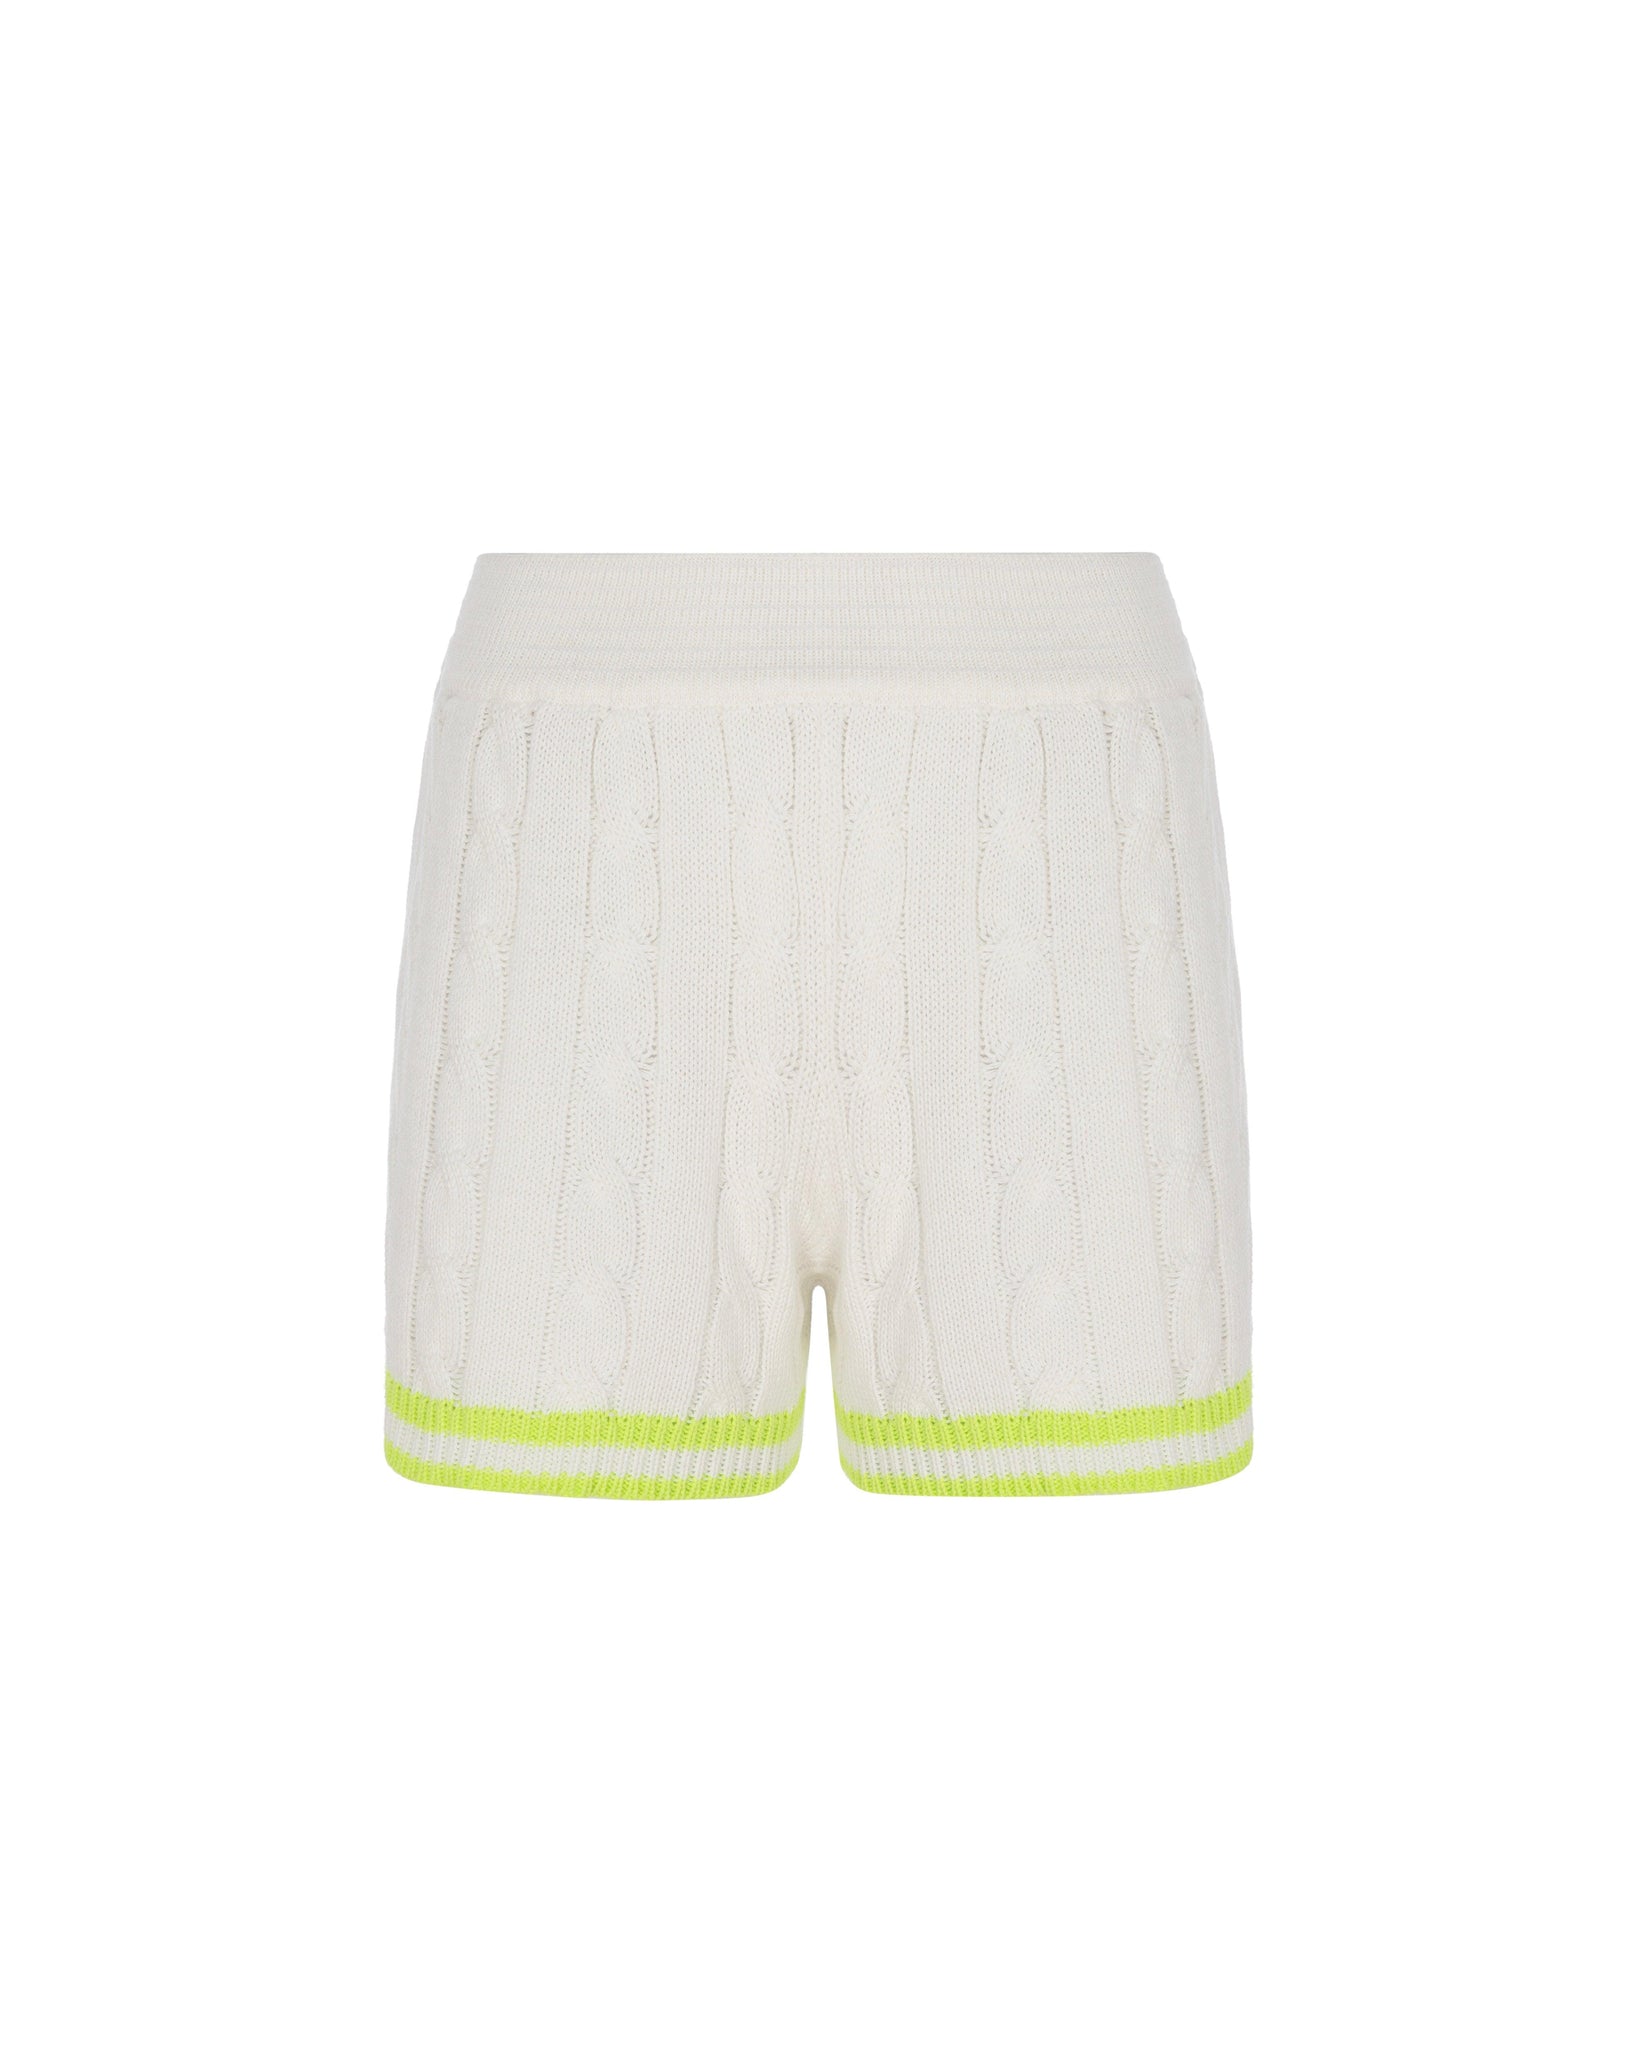 White and Neon Knitted Shorts